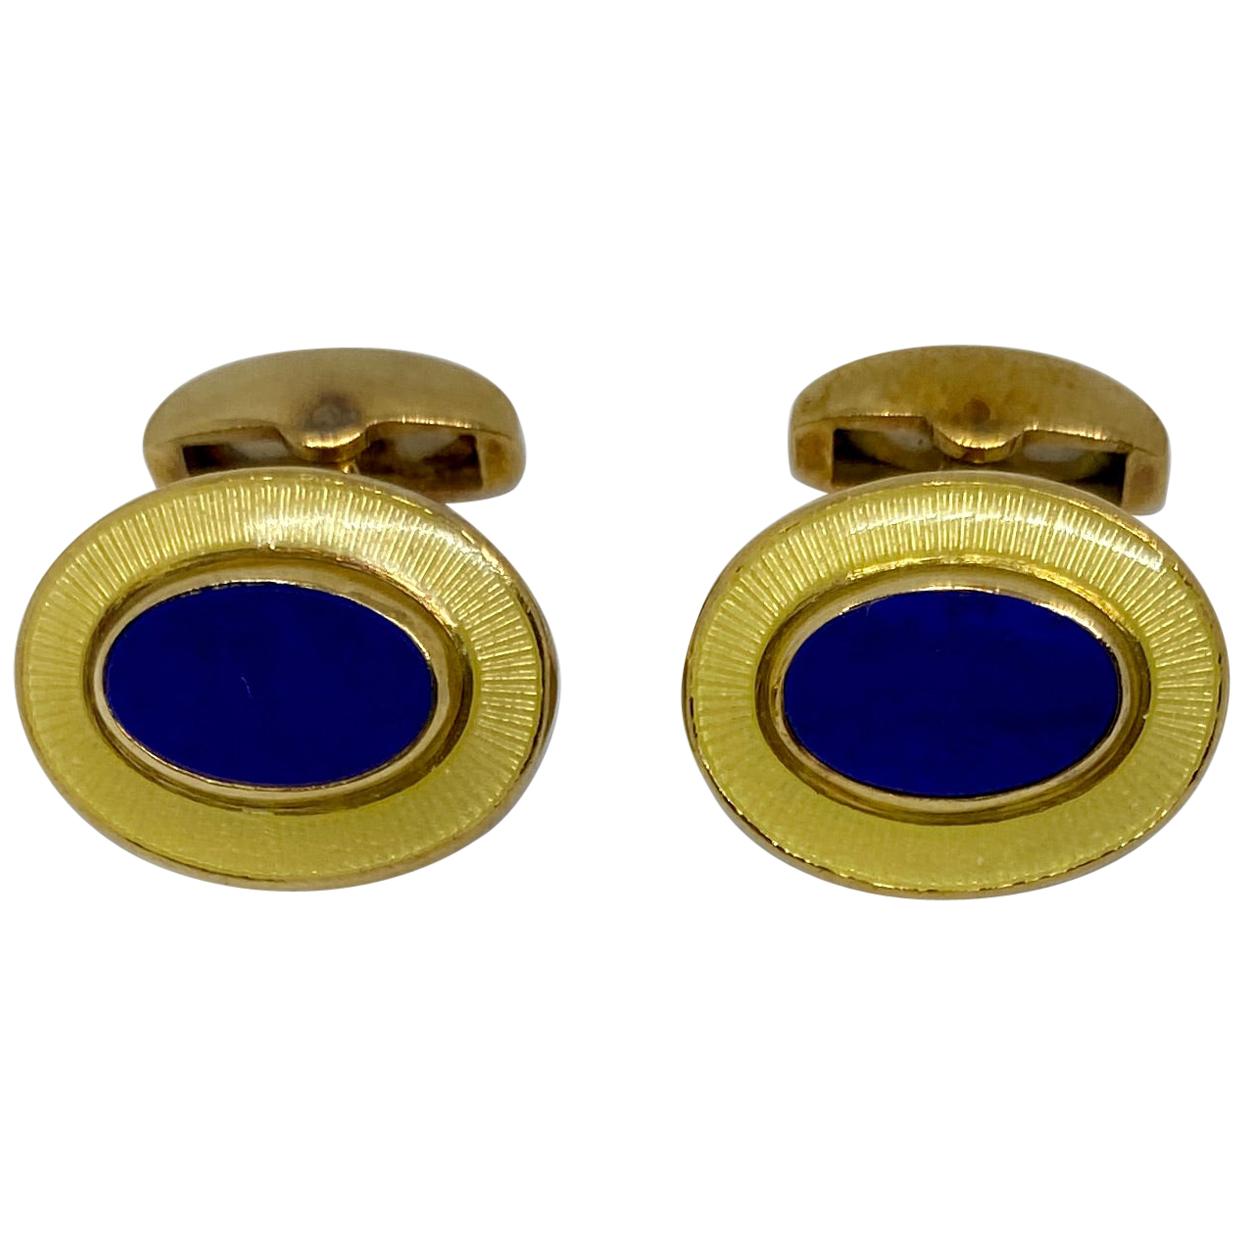 Deakin & Francis Cufflinks in 18 Karat Yellow Gold with Inset Lapis and Enamel